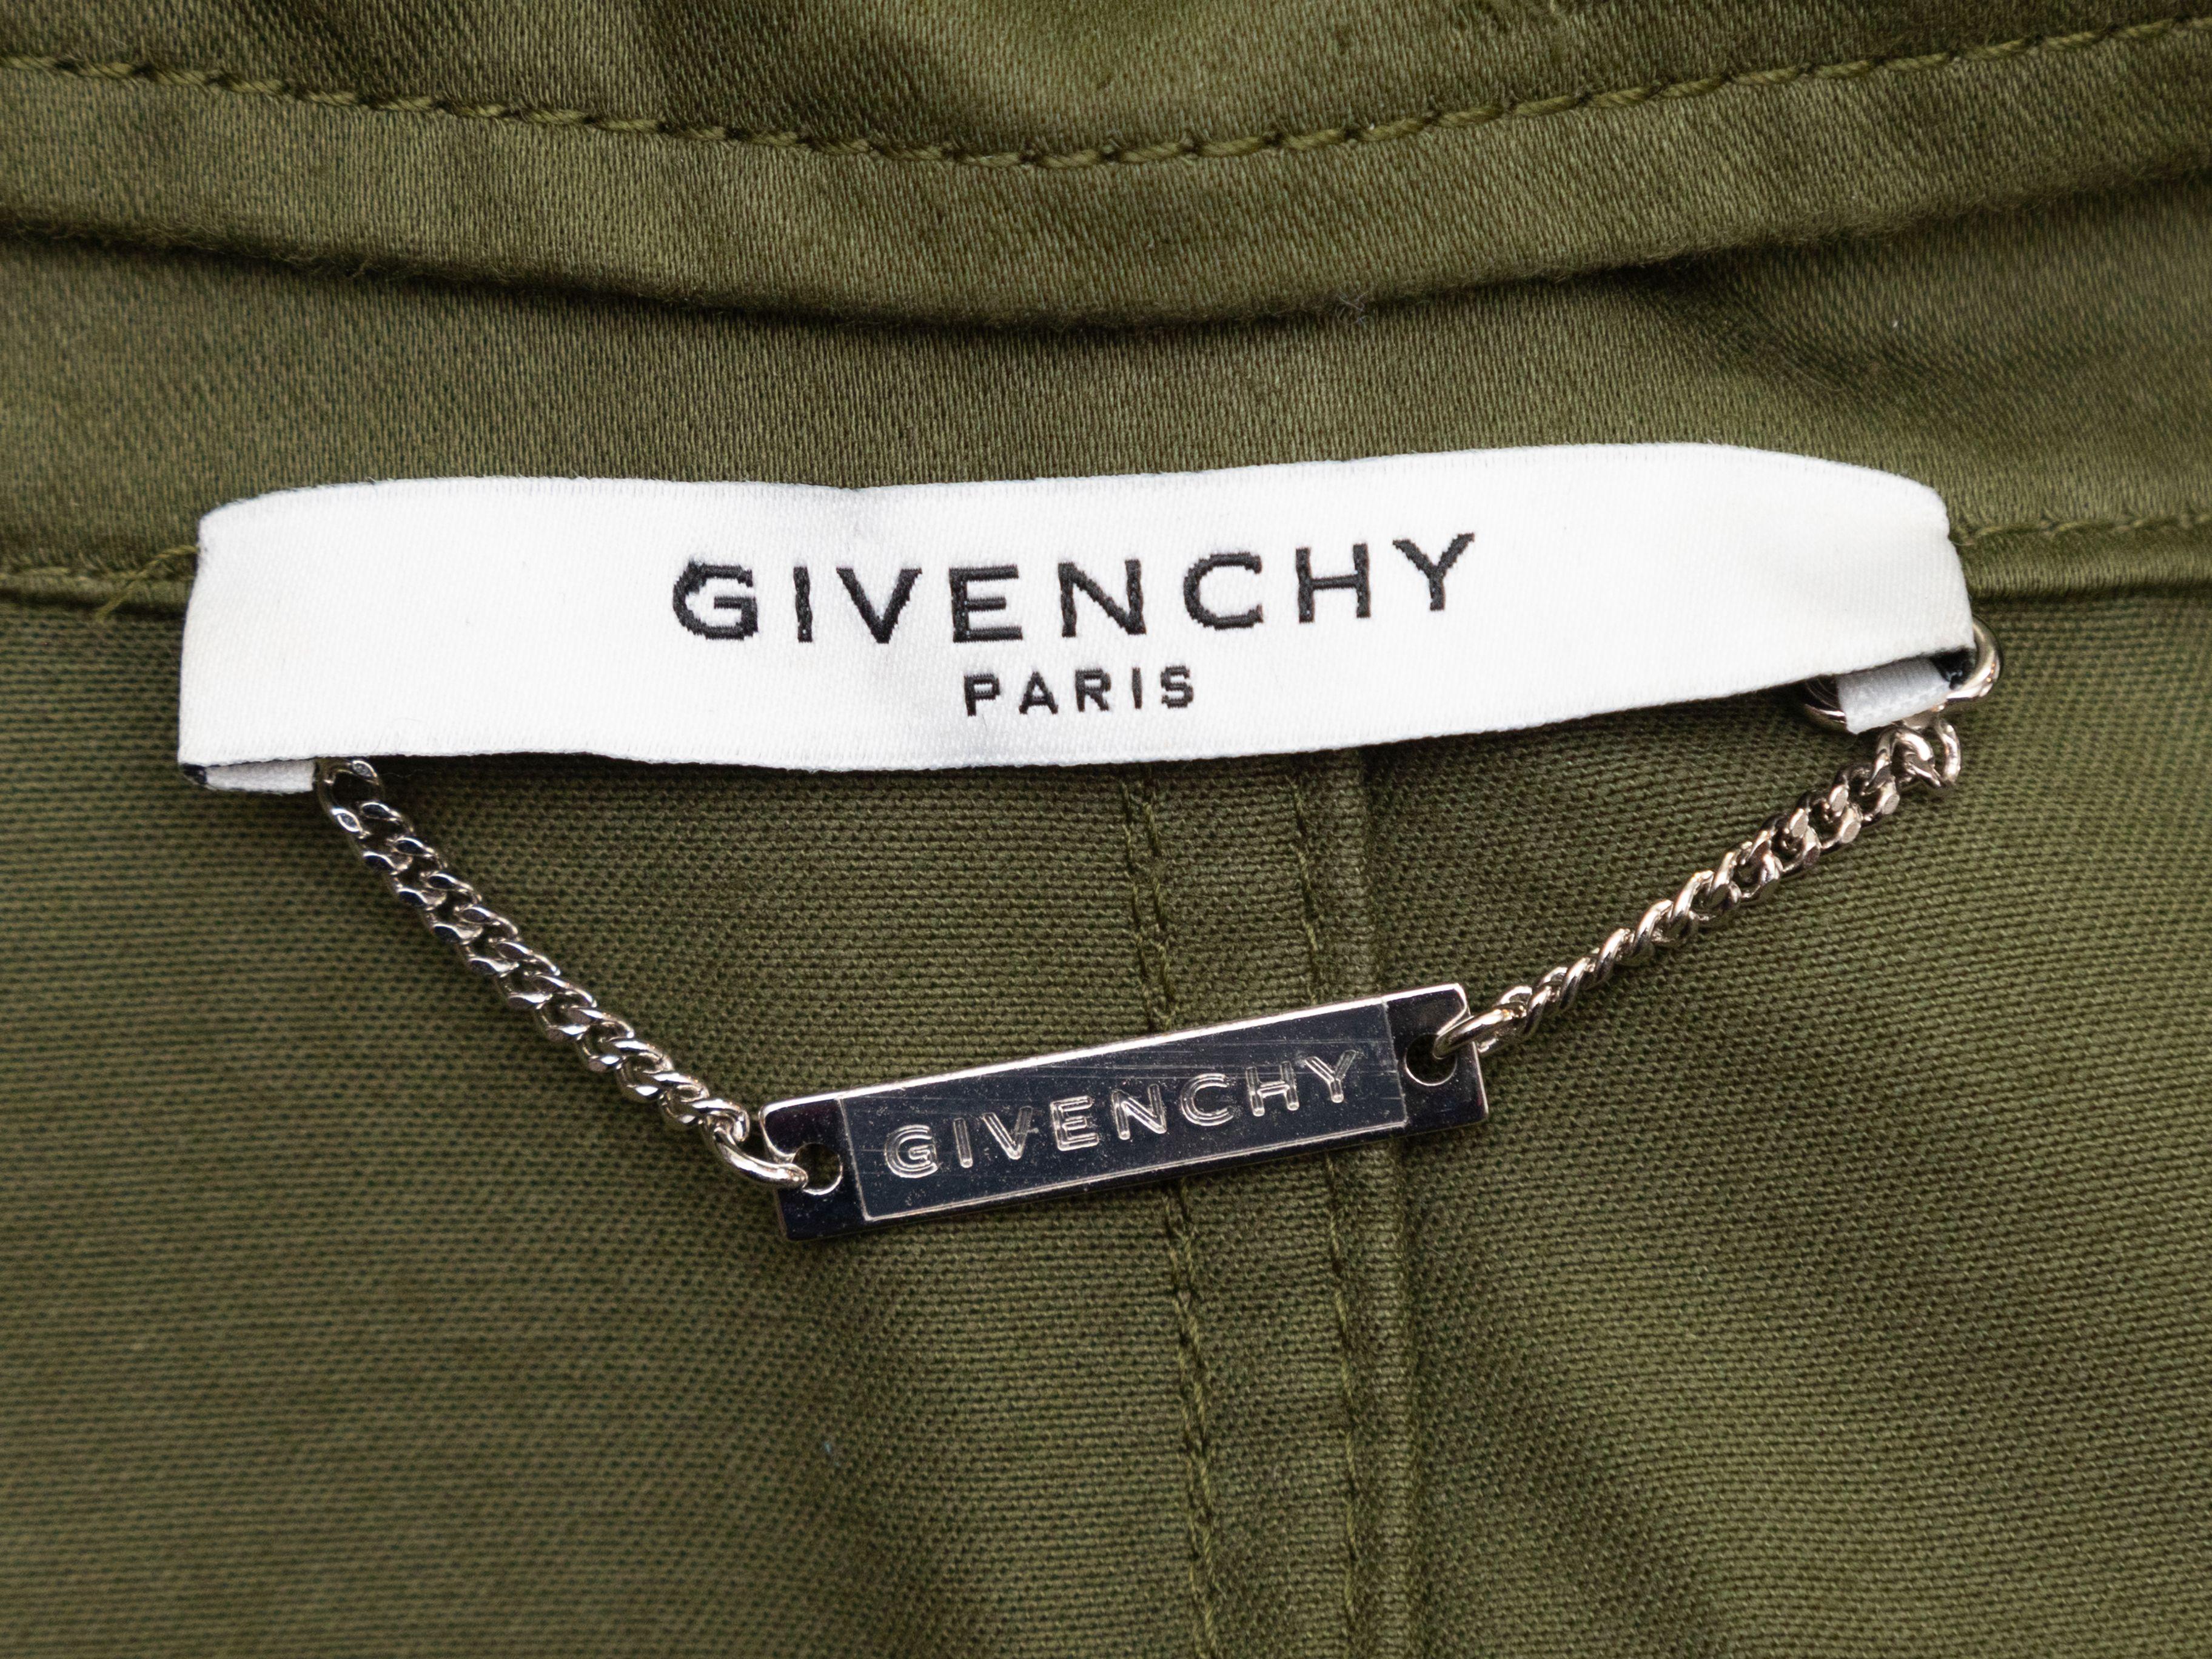 Product Details: Olive and multicolor cotton hooded parka by Givenchy. Dual hip pockets. Drawstring at waist and at hem. Graphic print at back. Concealed closures at center front. 36